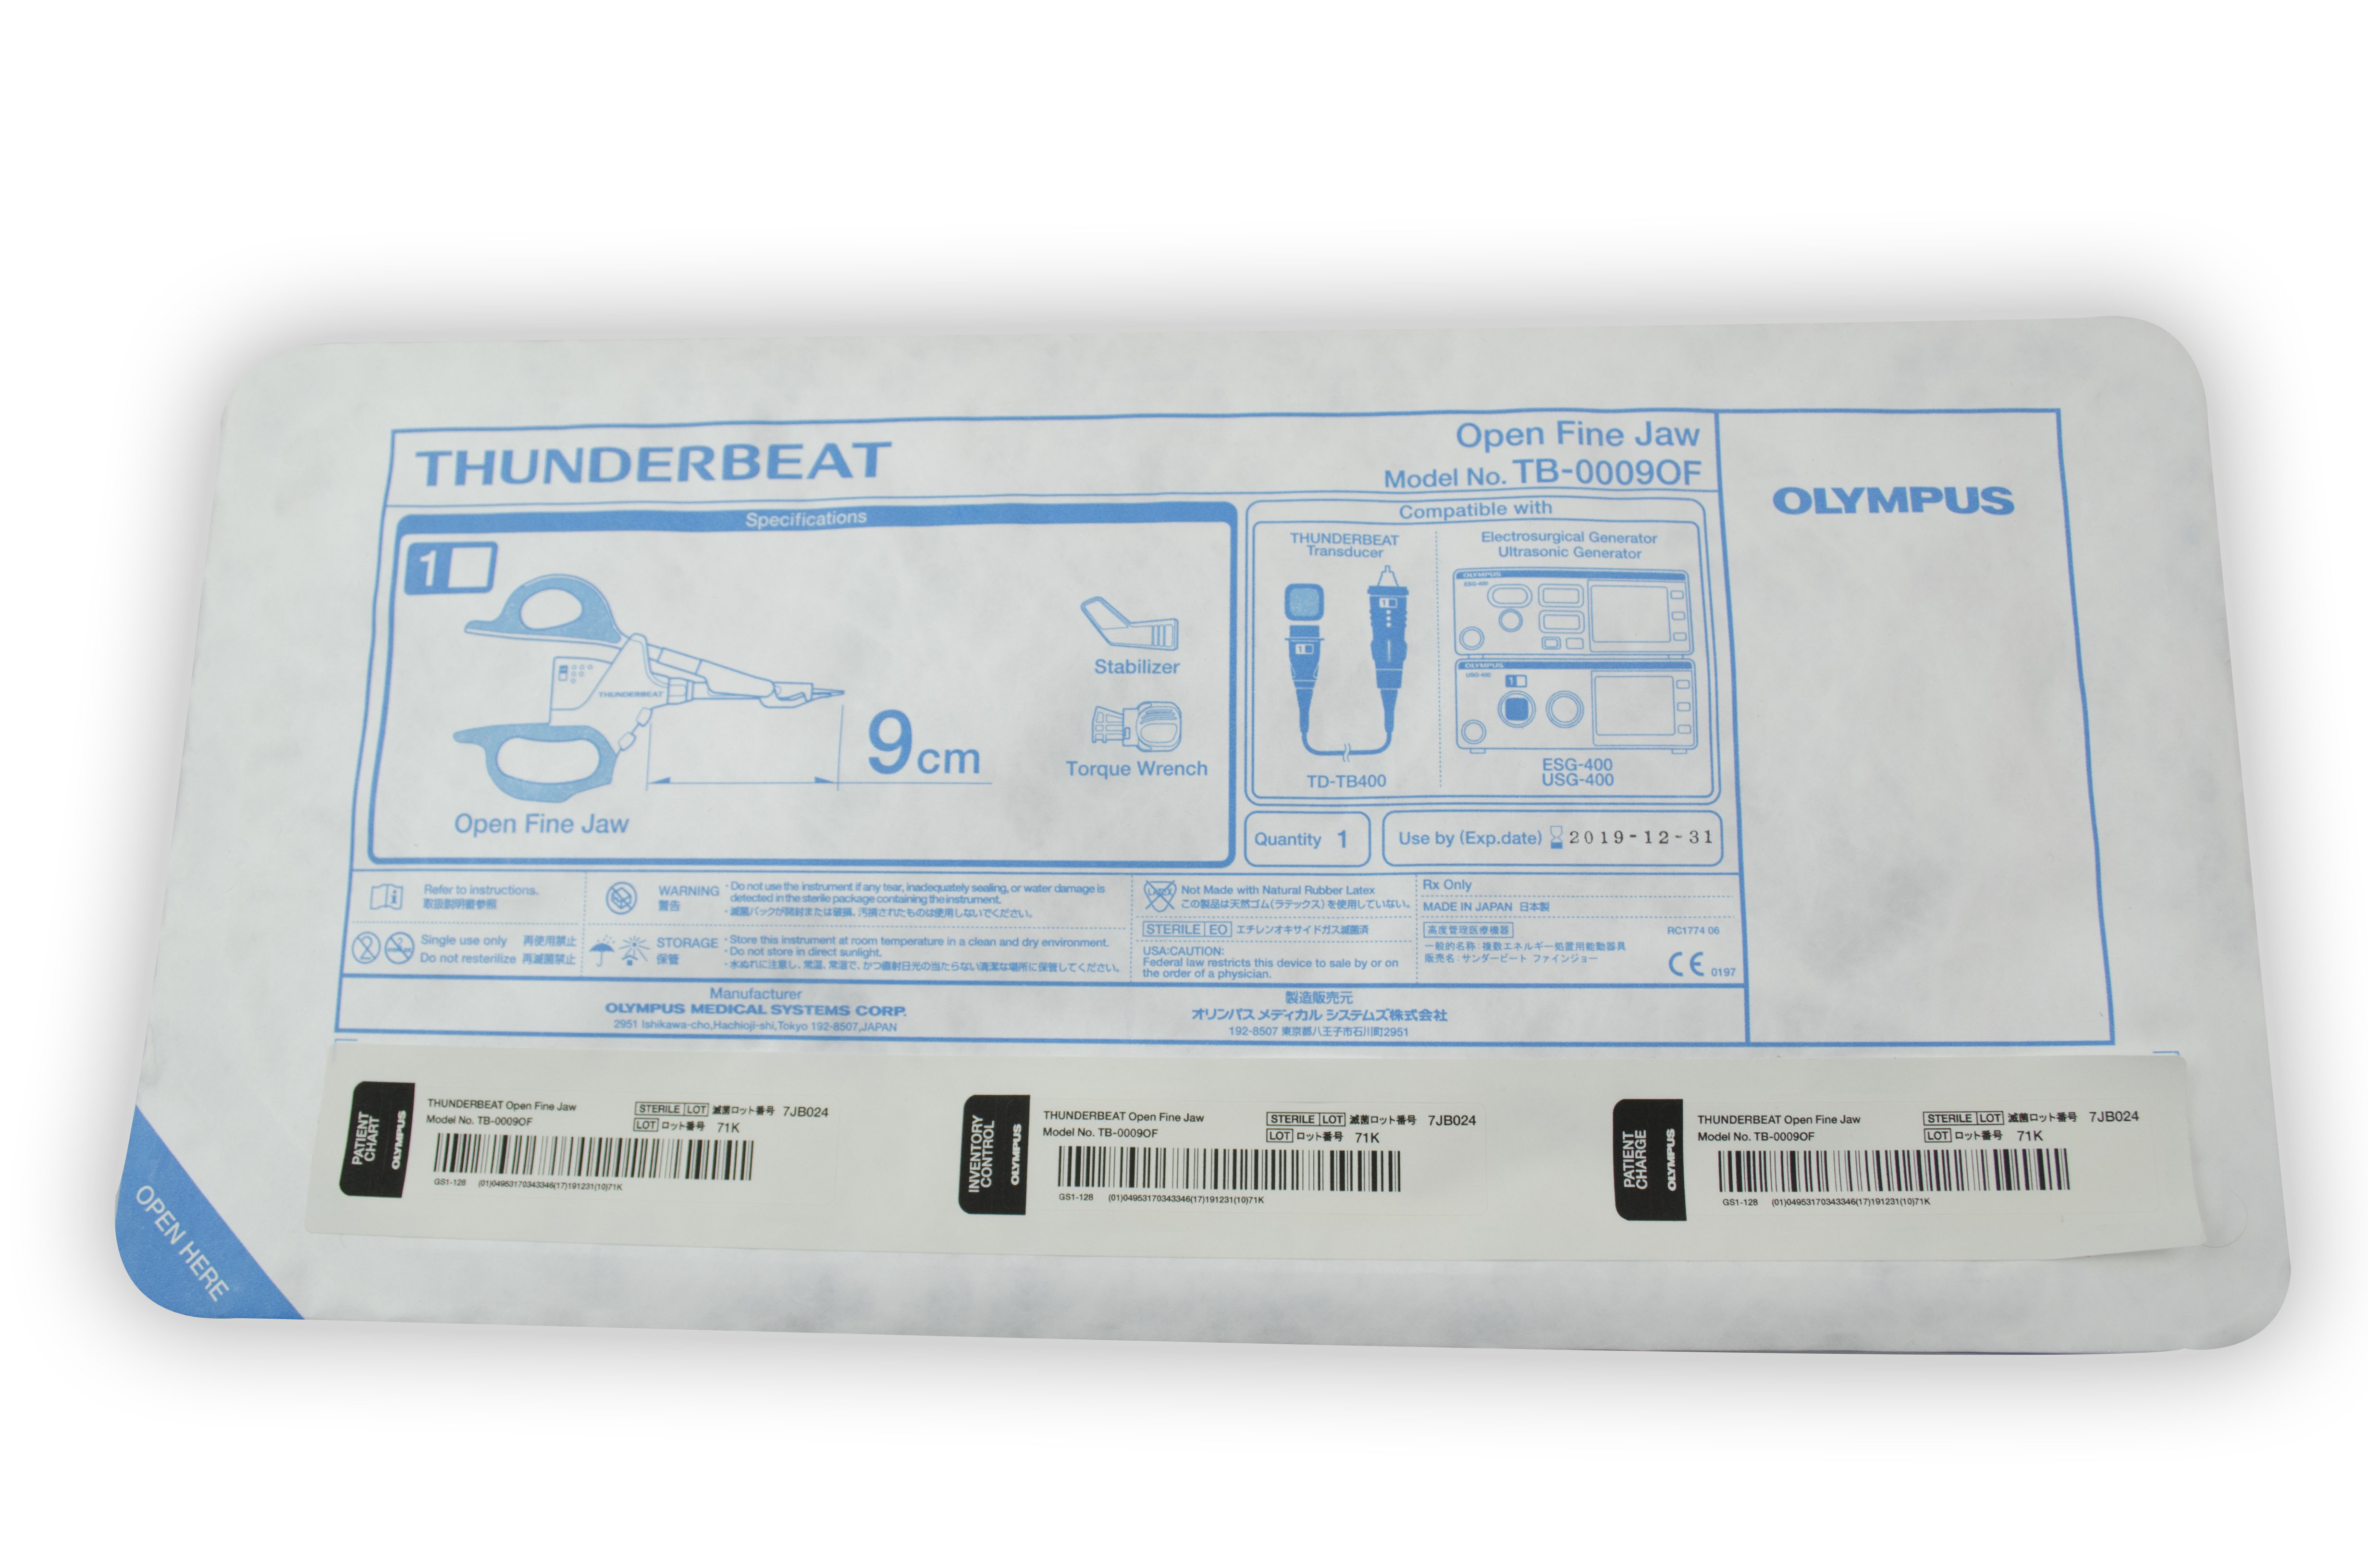 [Out-of-Date] Olympus Disposable THUNDERBEAT Handpiece (Open Fine Jaw, 0 mm, 9 cm) - TB-0009OF: For EPF-1 Platform (Original Packaging)